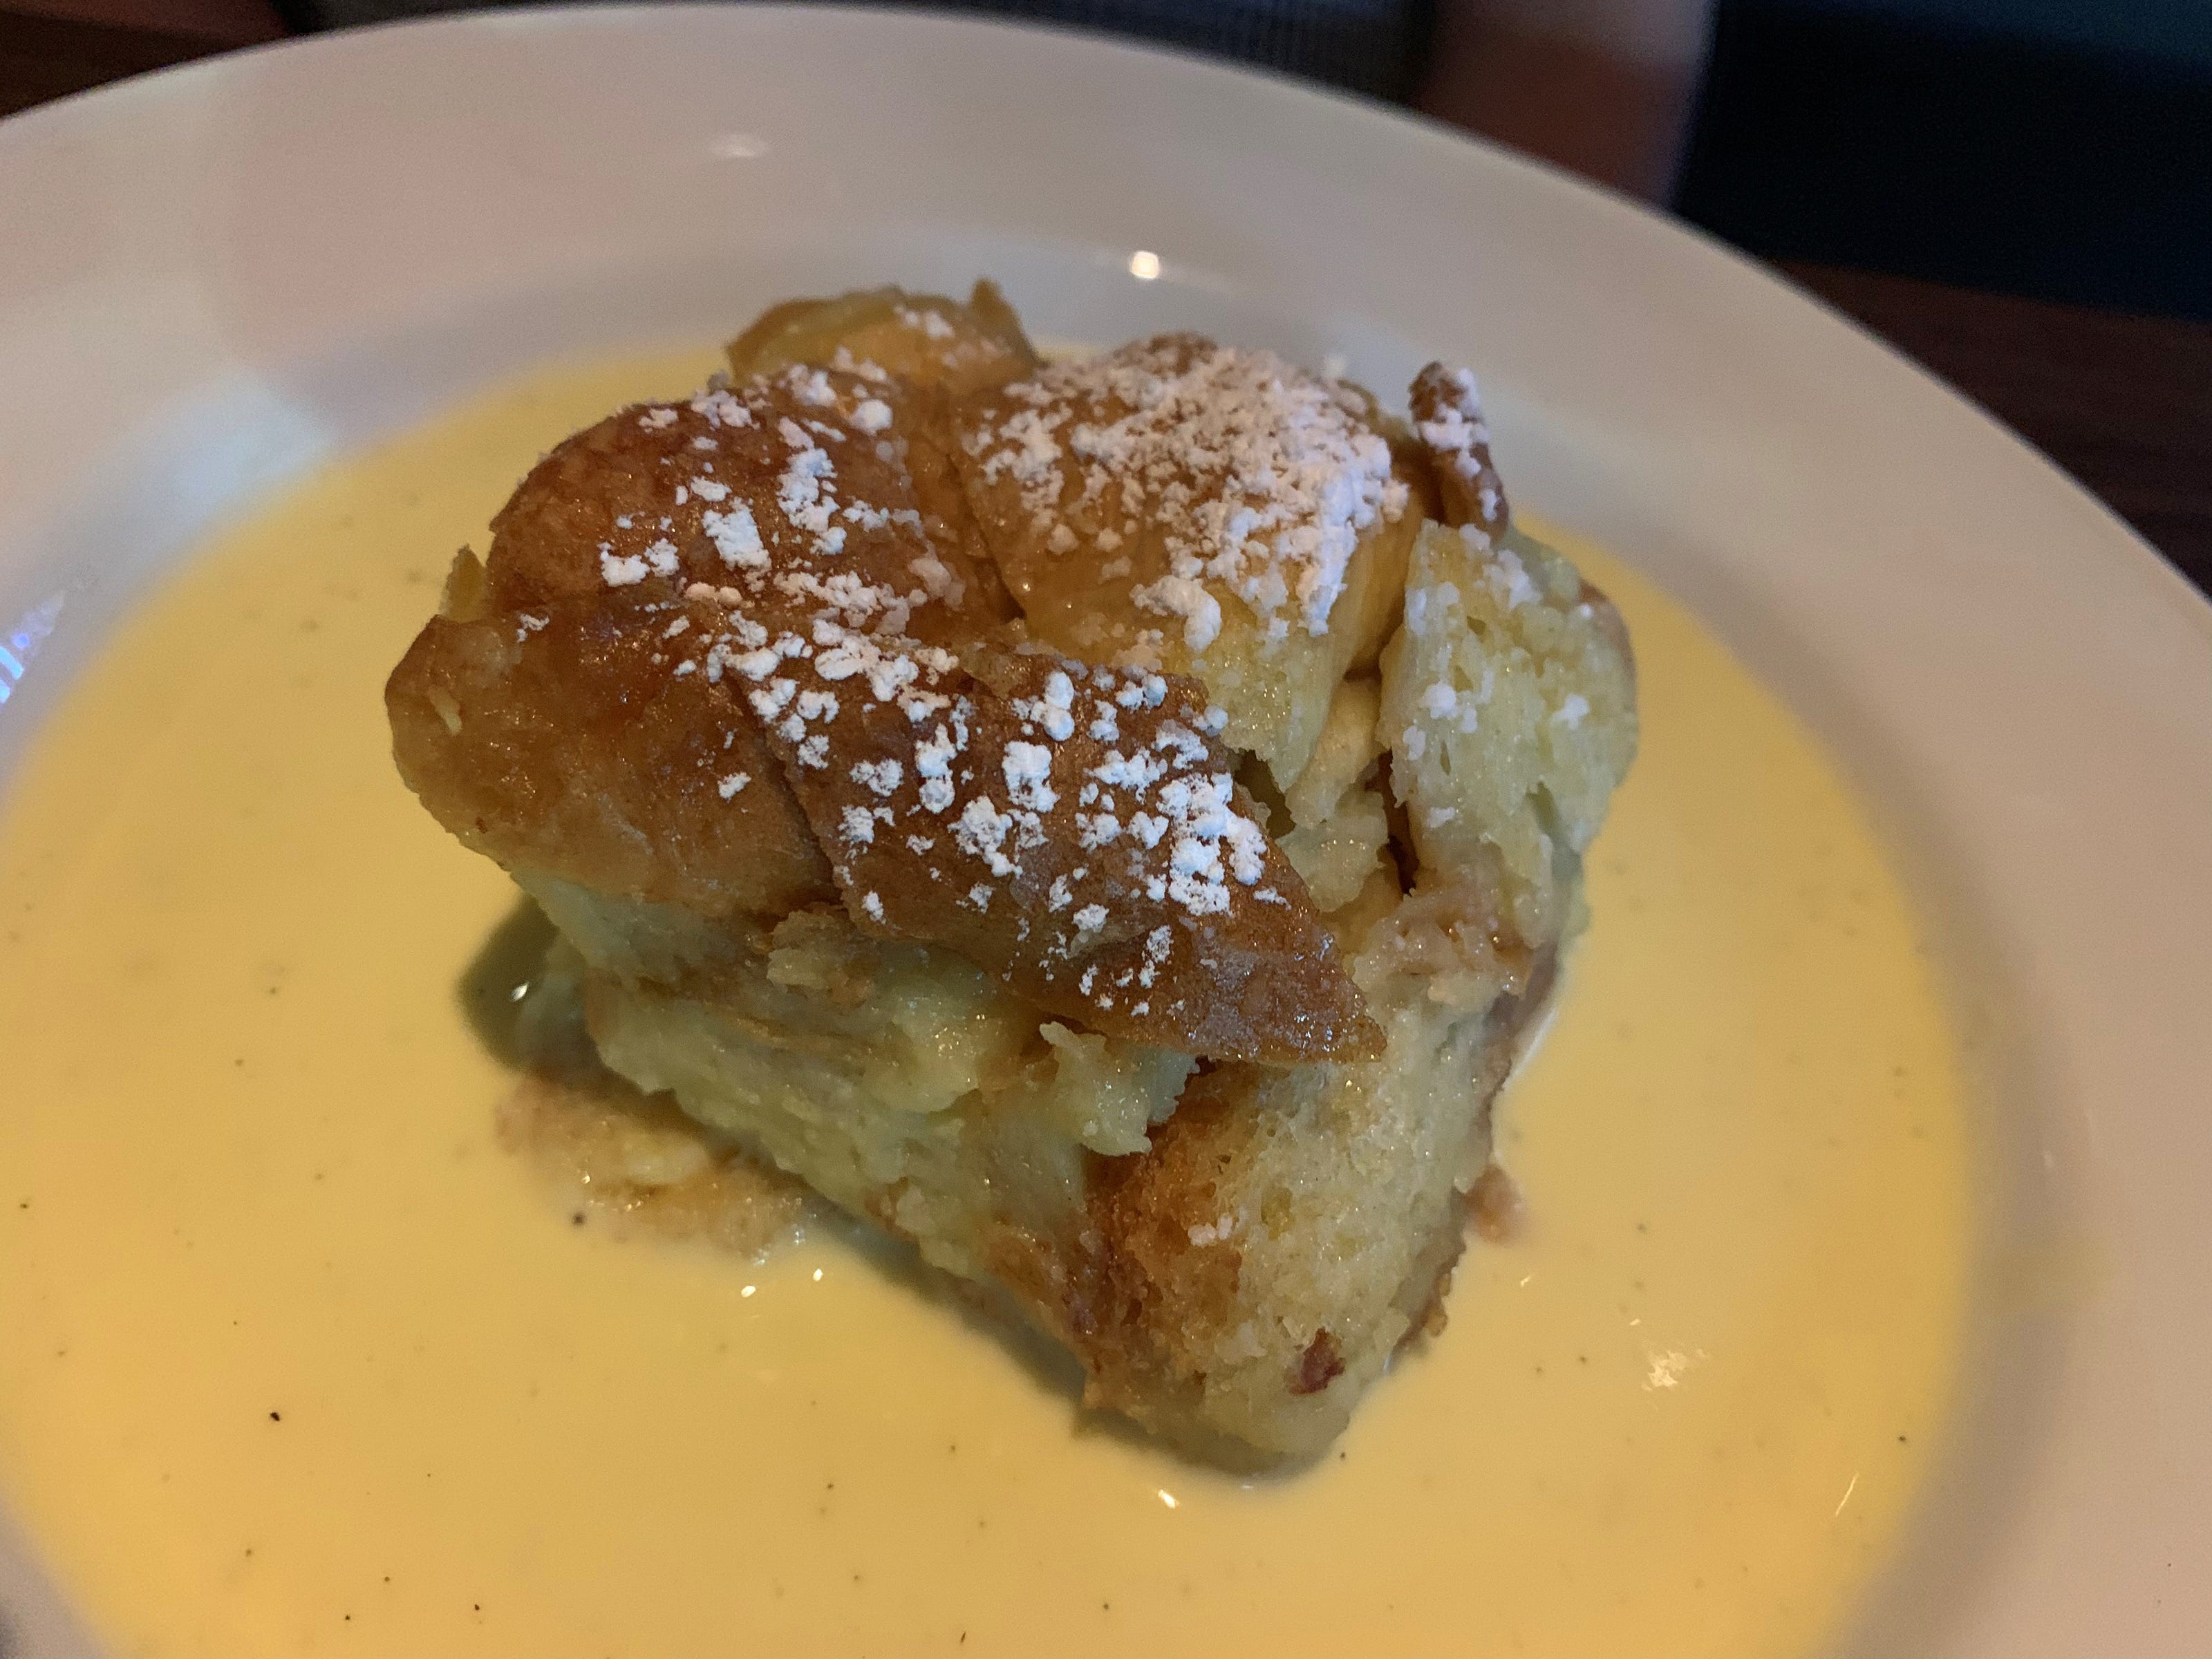 Yard House Bread Pudding Recipe / Savor The Bread Pudding Souffle At Commander S Palace Garden Gun